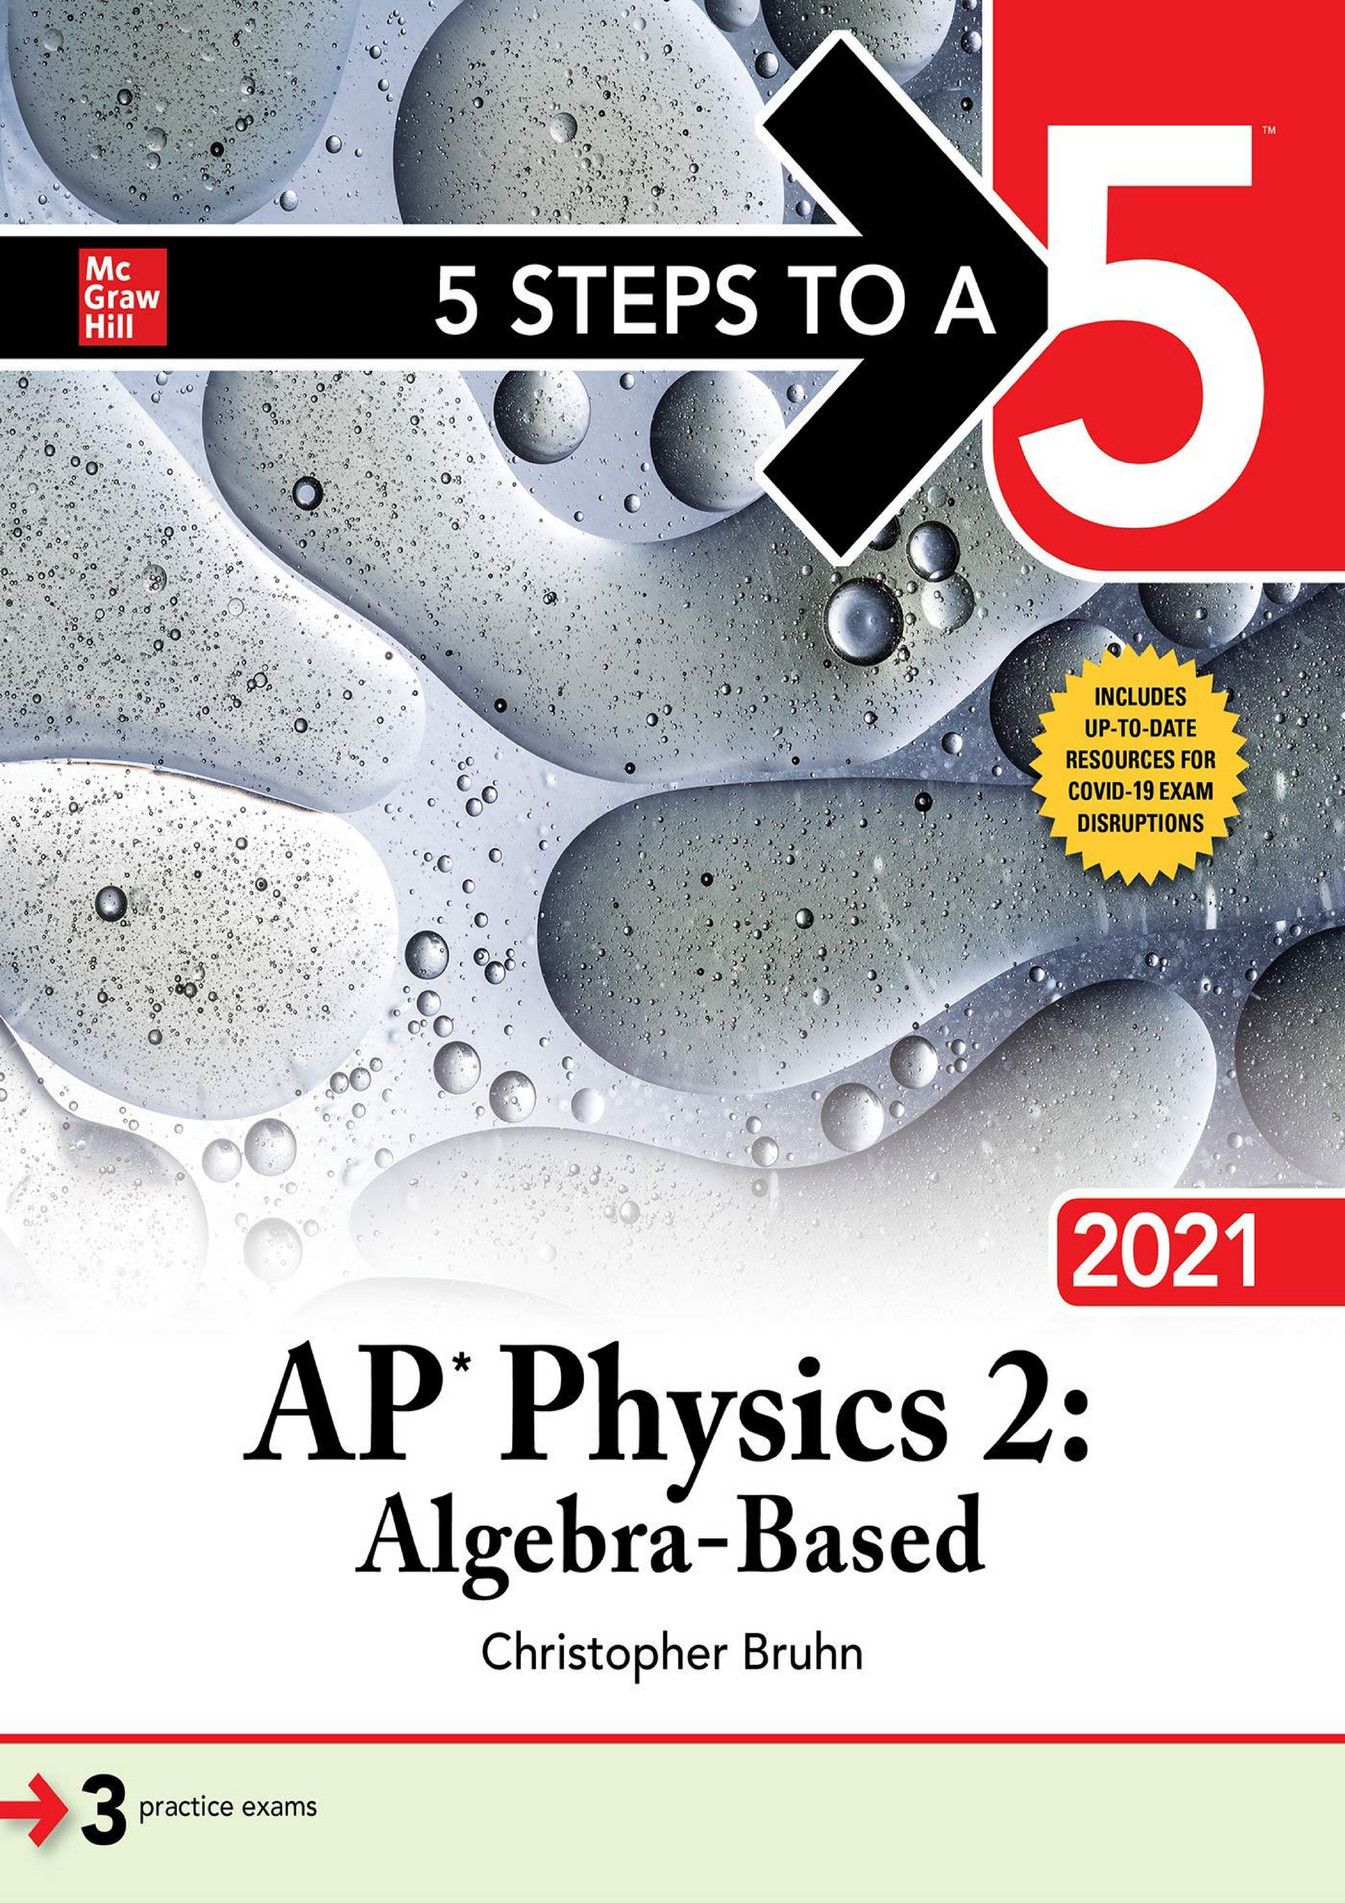 Deirdre READ 5 Steps to a 5 AP Physics 2 Algebra Based 2021 Page 1 Created with